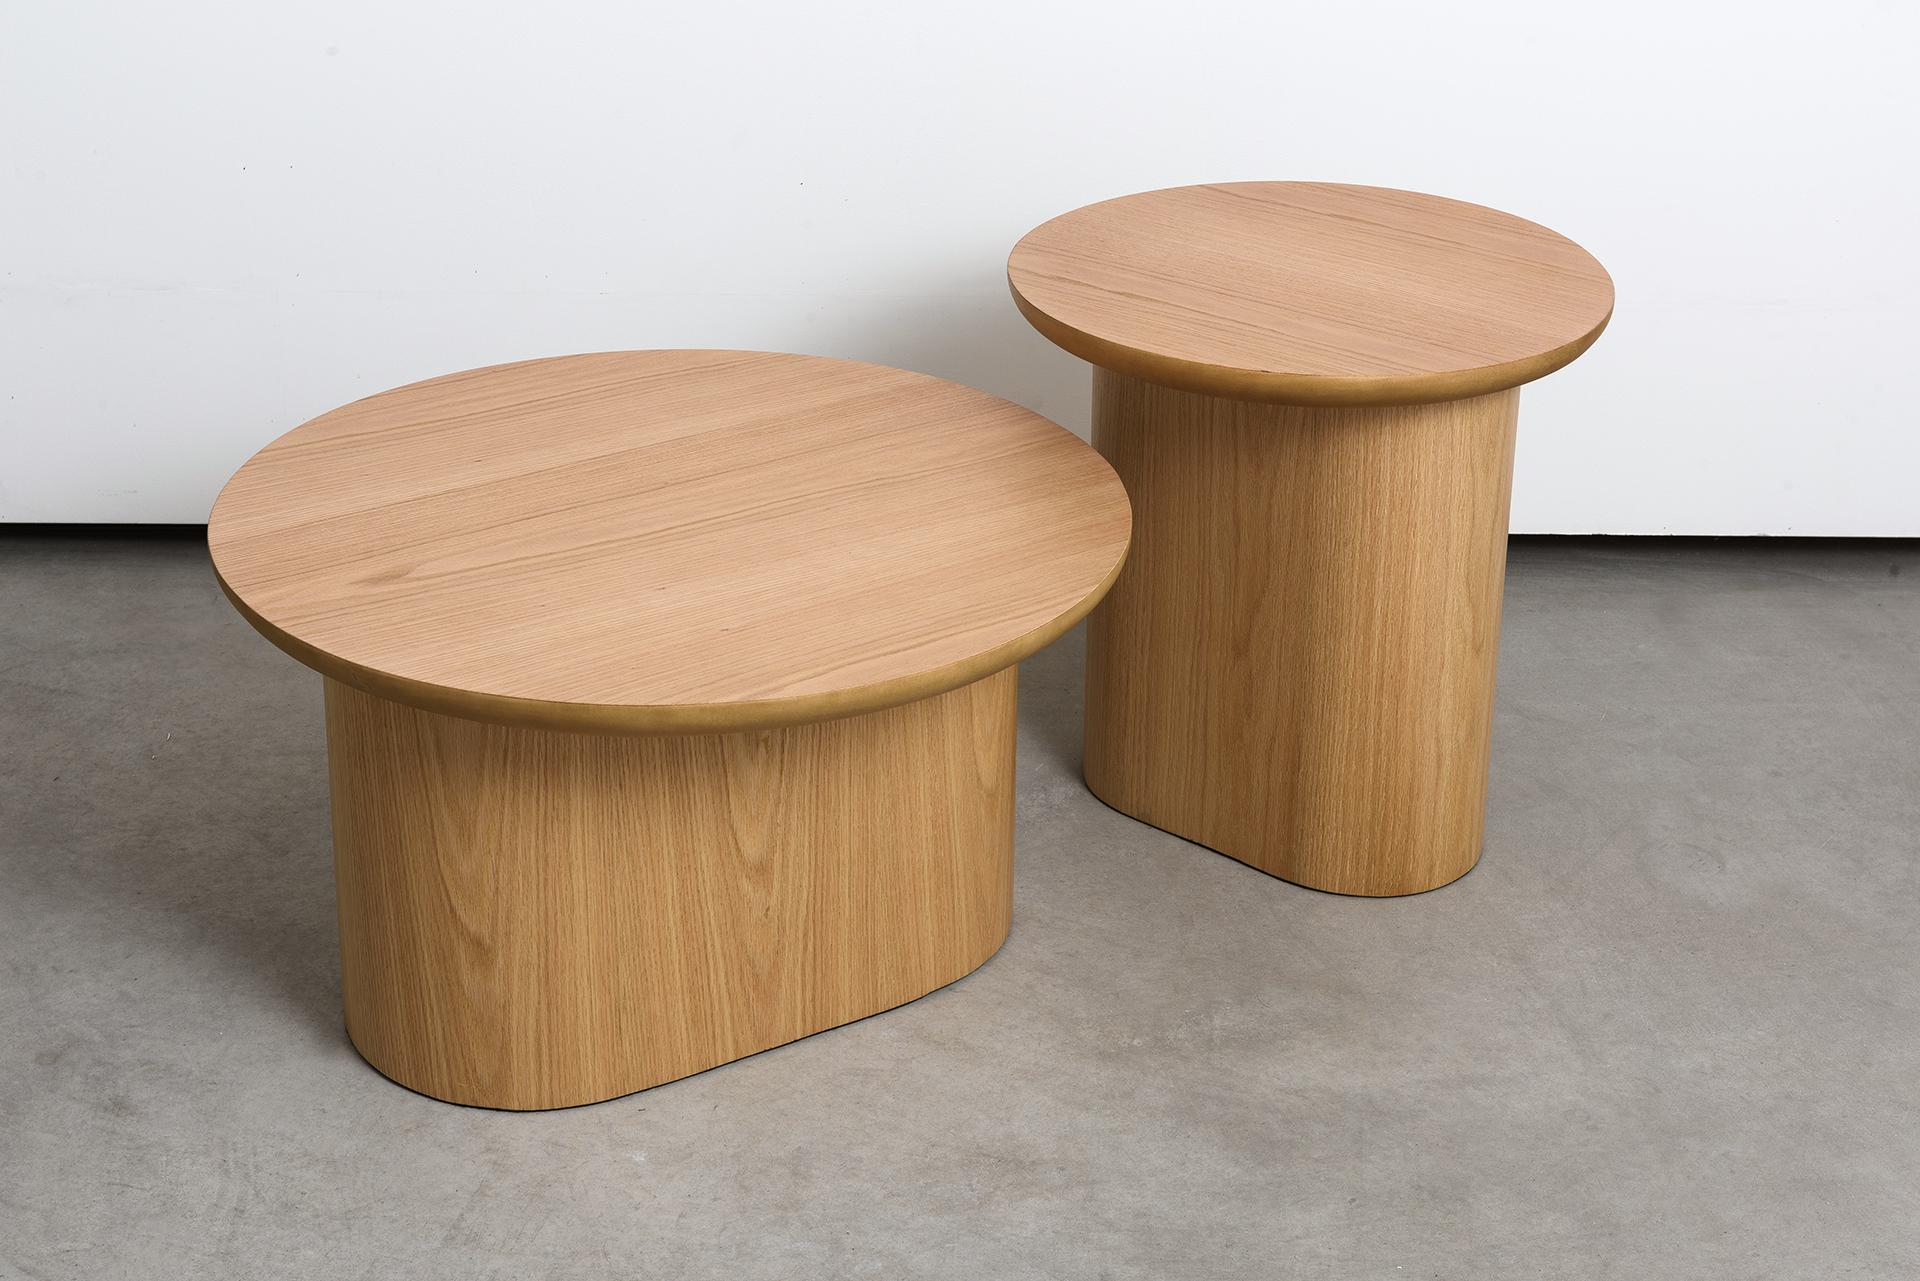 Set composed of two Porto side tables, a high and a low.
Dimensions: High table D 50/ H 50 cm - Low table D 70/ H 40 cm 

Porto low tables are composed of a circular top that seems to rest on a sturdy oblong base. Lightness and weight overlap